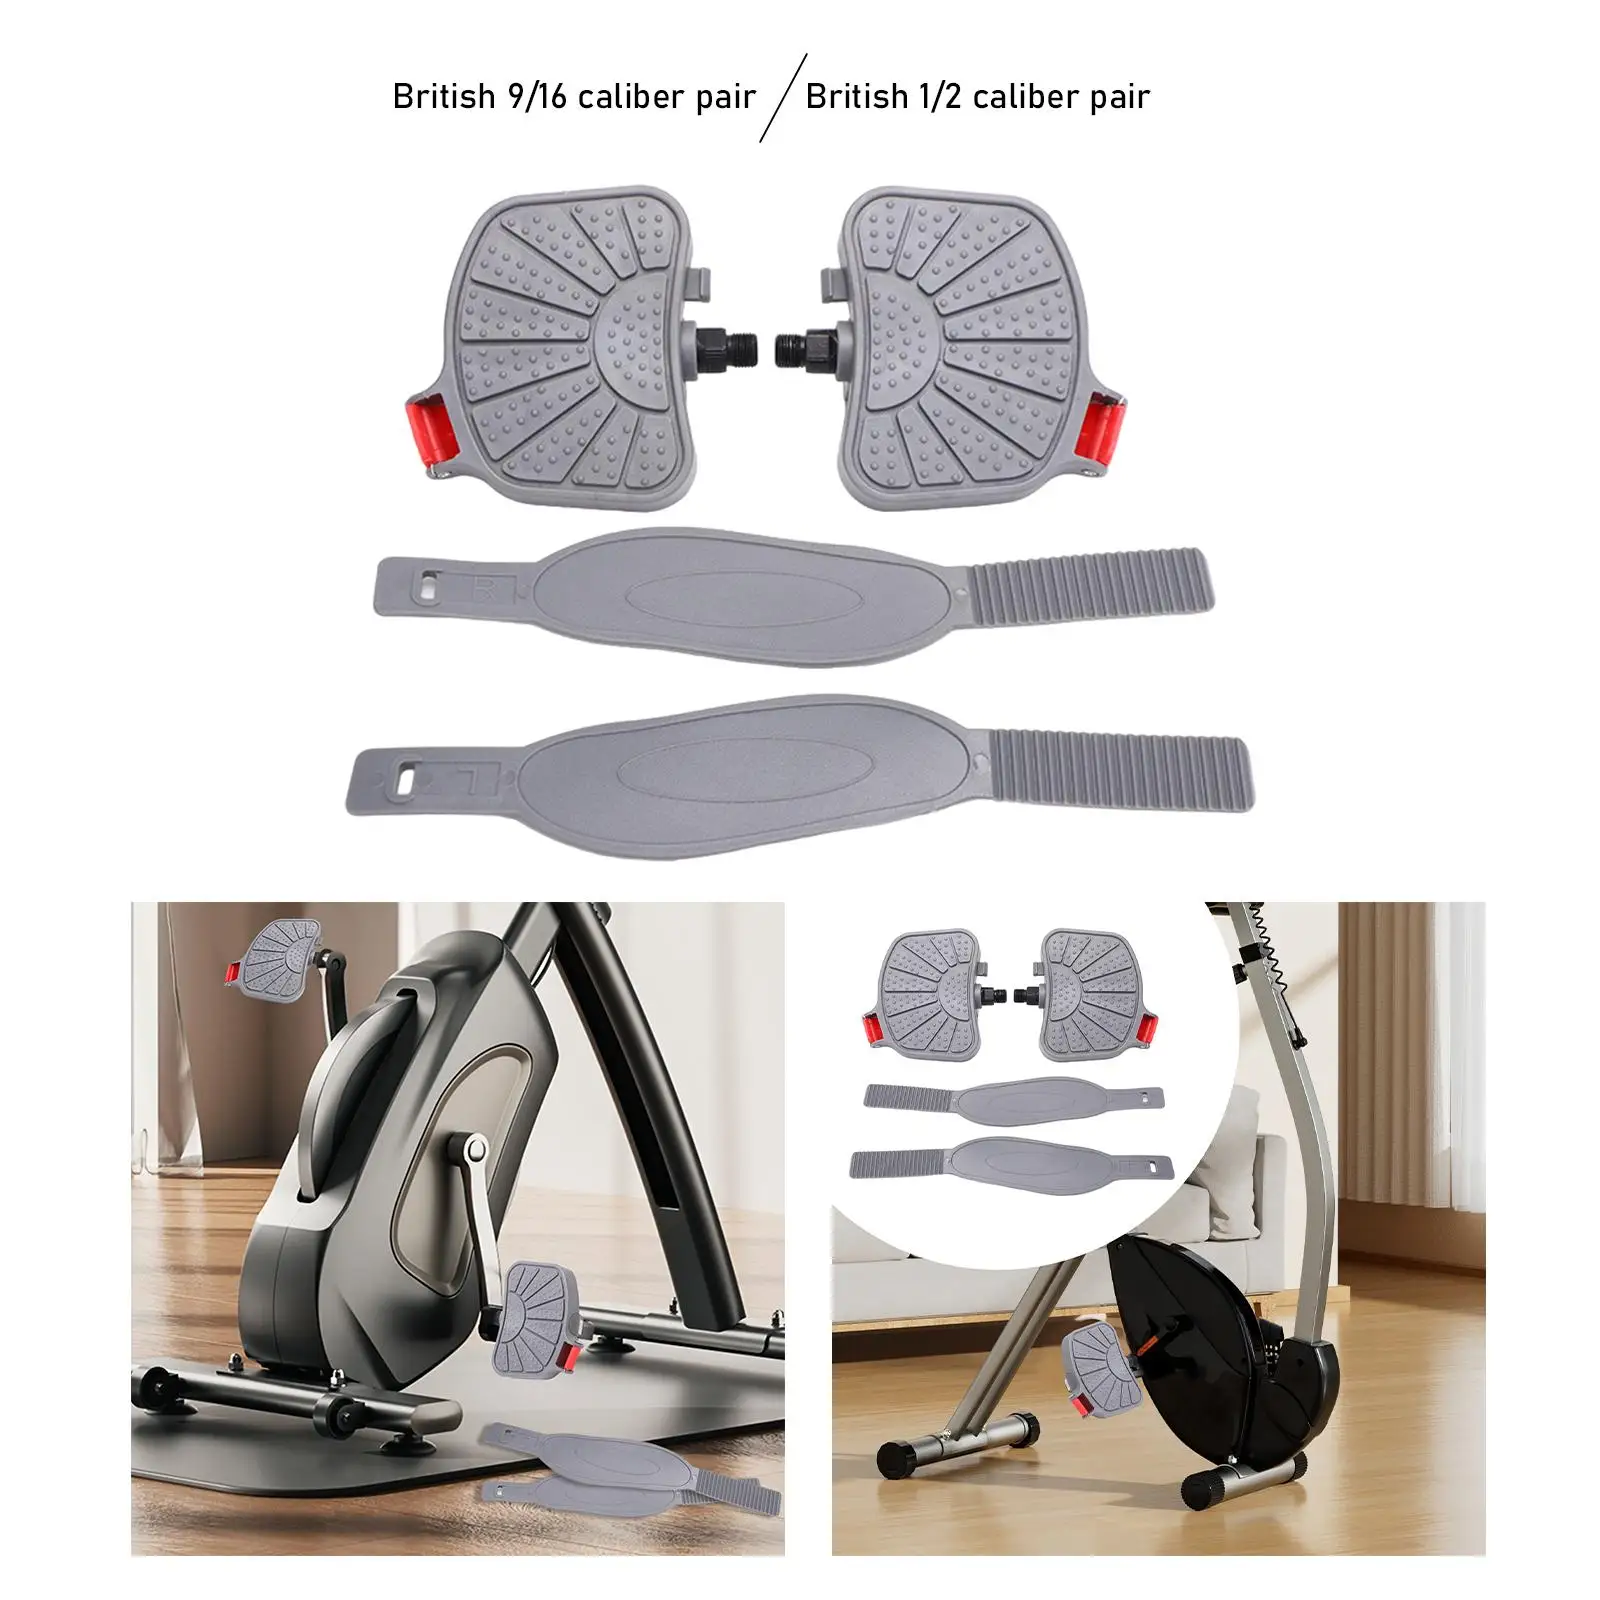 1 Pair Exercise Bike Pedals Exercycle Pedals Widened Strips Adjustable Straps for Stationary Exercise Bikes Home Office Workout